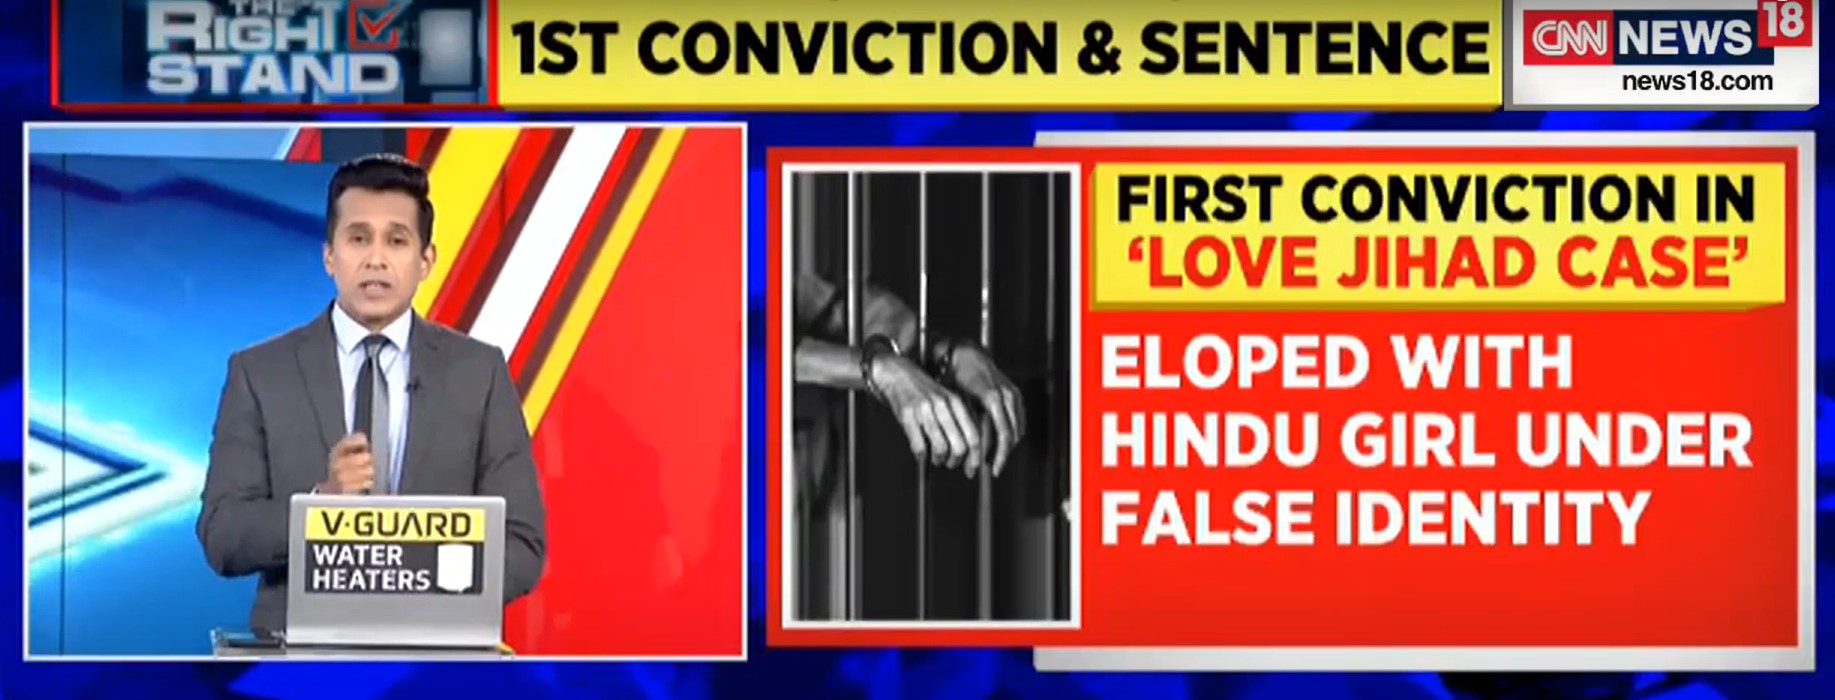 CNN News incorrectly reported on Wednesday that the Kanpur Court has convicted and sentenced the man under the Love Jihad Law.